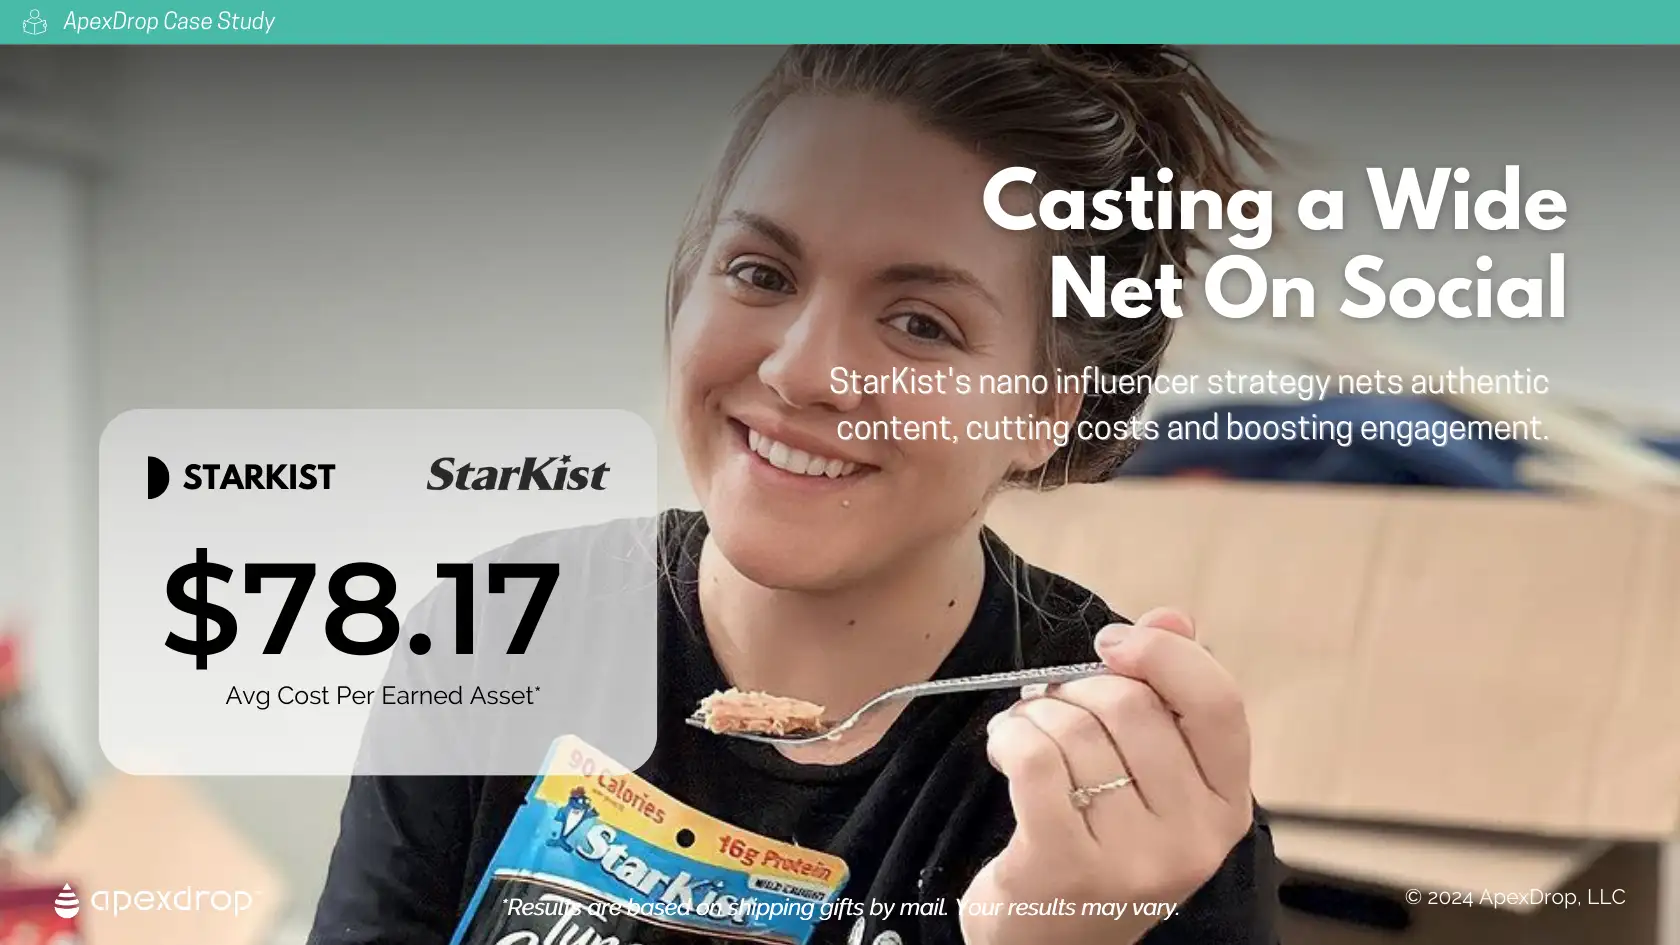 Casting a Wide Net on Social - StarKist's nano influencer strategy nets authentic content, cutting costs and boosting engagement.